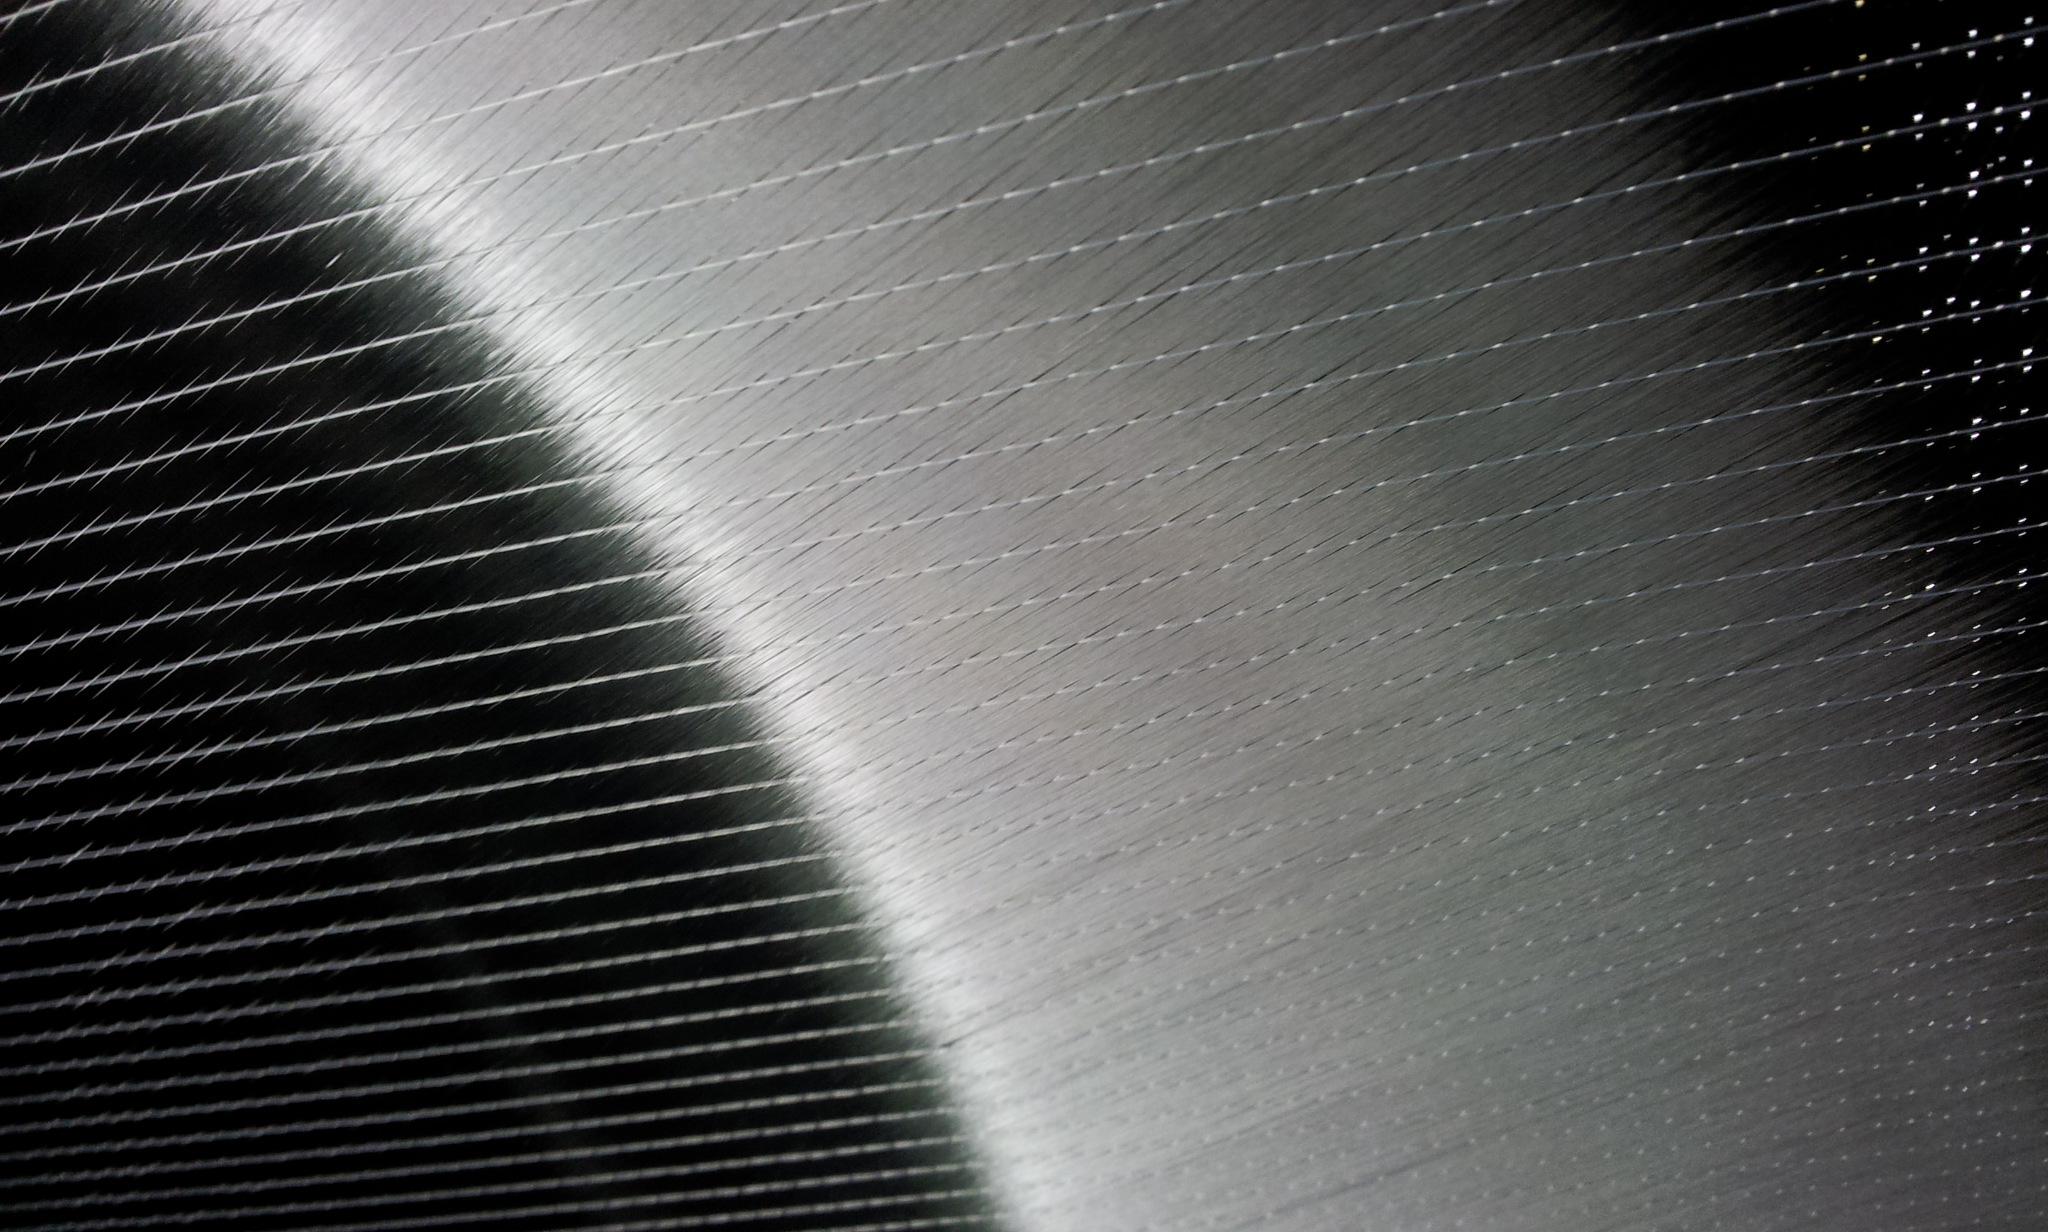 Chomarat makes fabrics, tapes and multiaxial carbon reinforcements, including its C-PLY range, for the aerospace market.